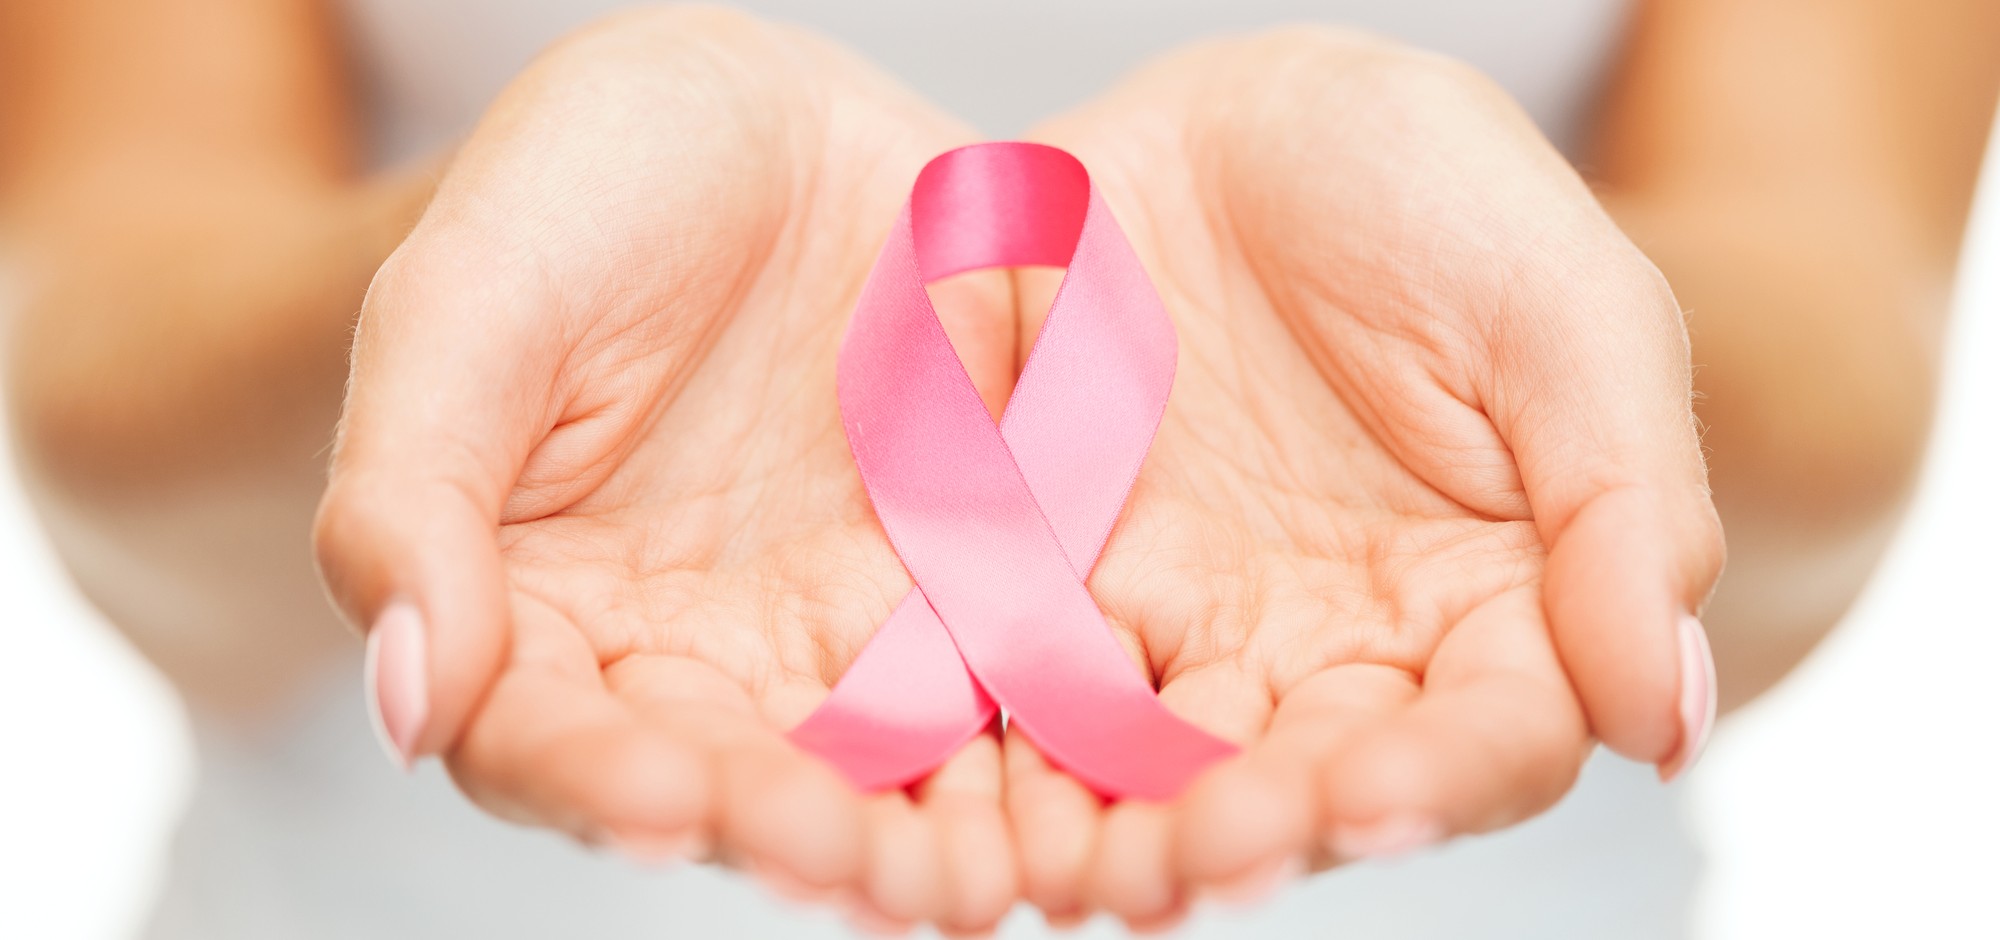 Read more about the article The Truth about Breast Cancer Awareness: เบื้องหลังริบบิ้นสีชมพู การรณรงค์มะเร็งเต้านม